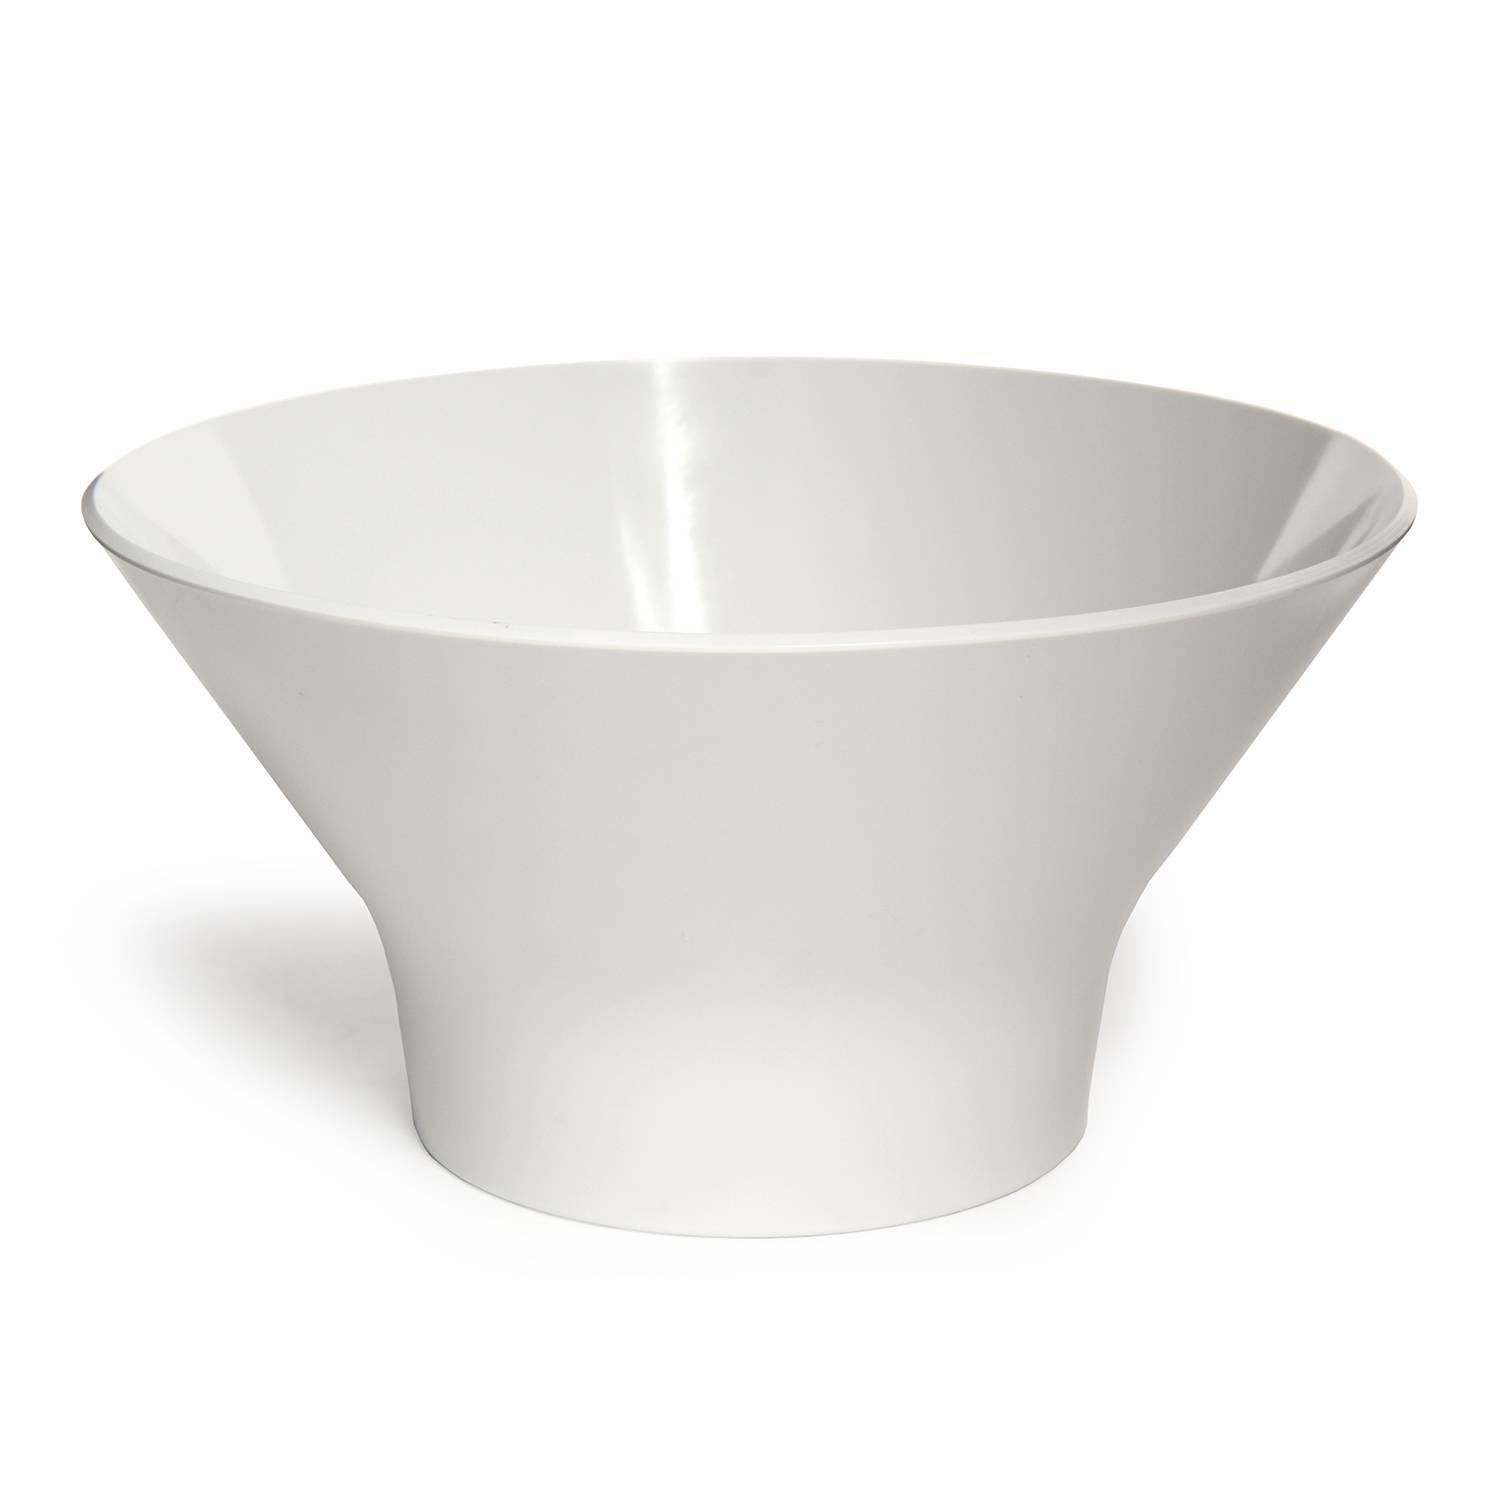 A sculptural and graphic round footed plastic serving bowl having an expressive flaring form.